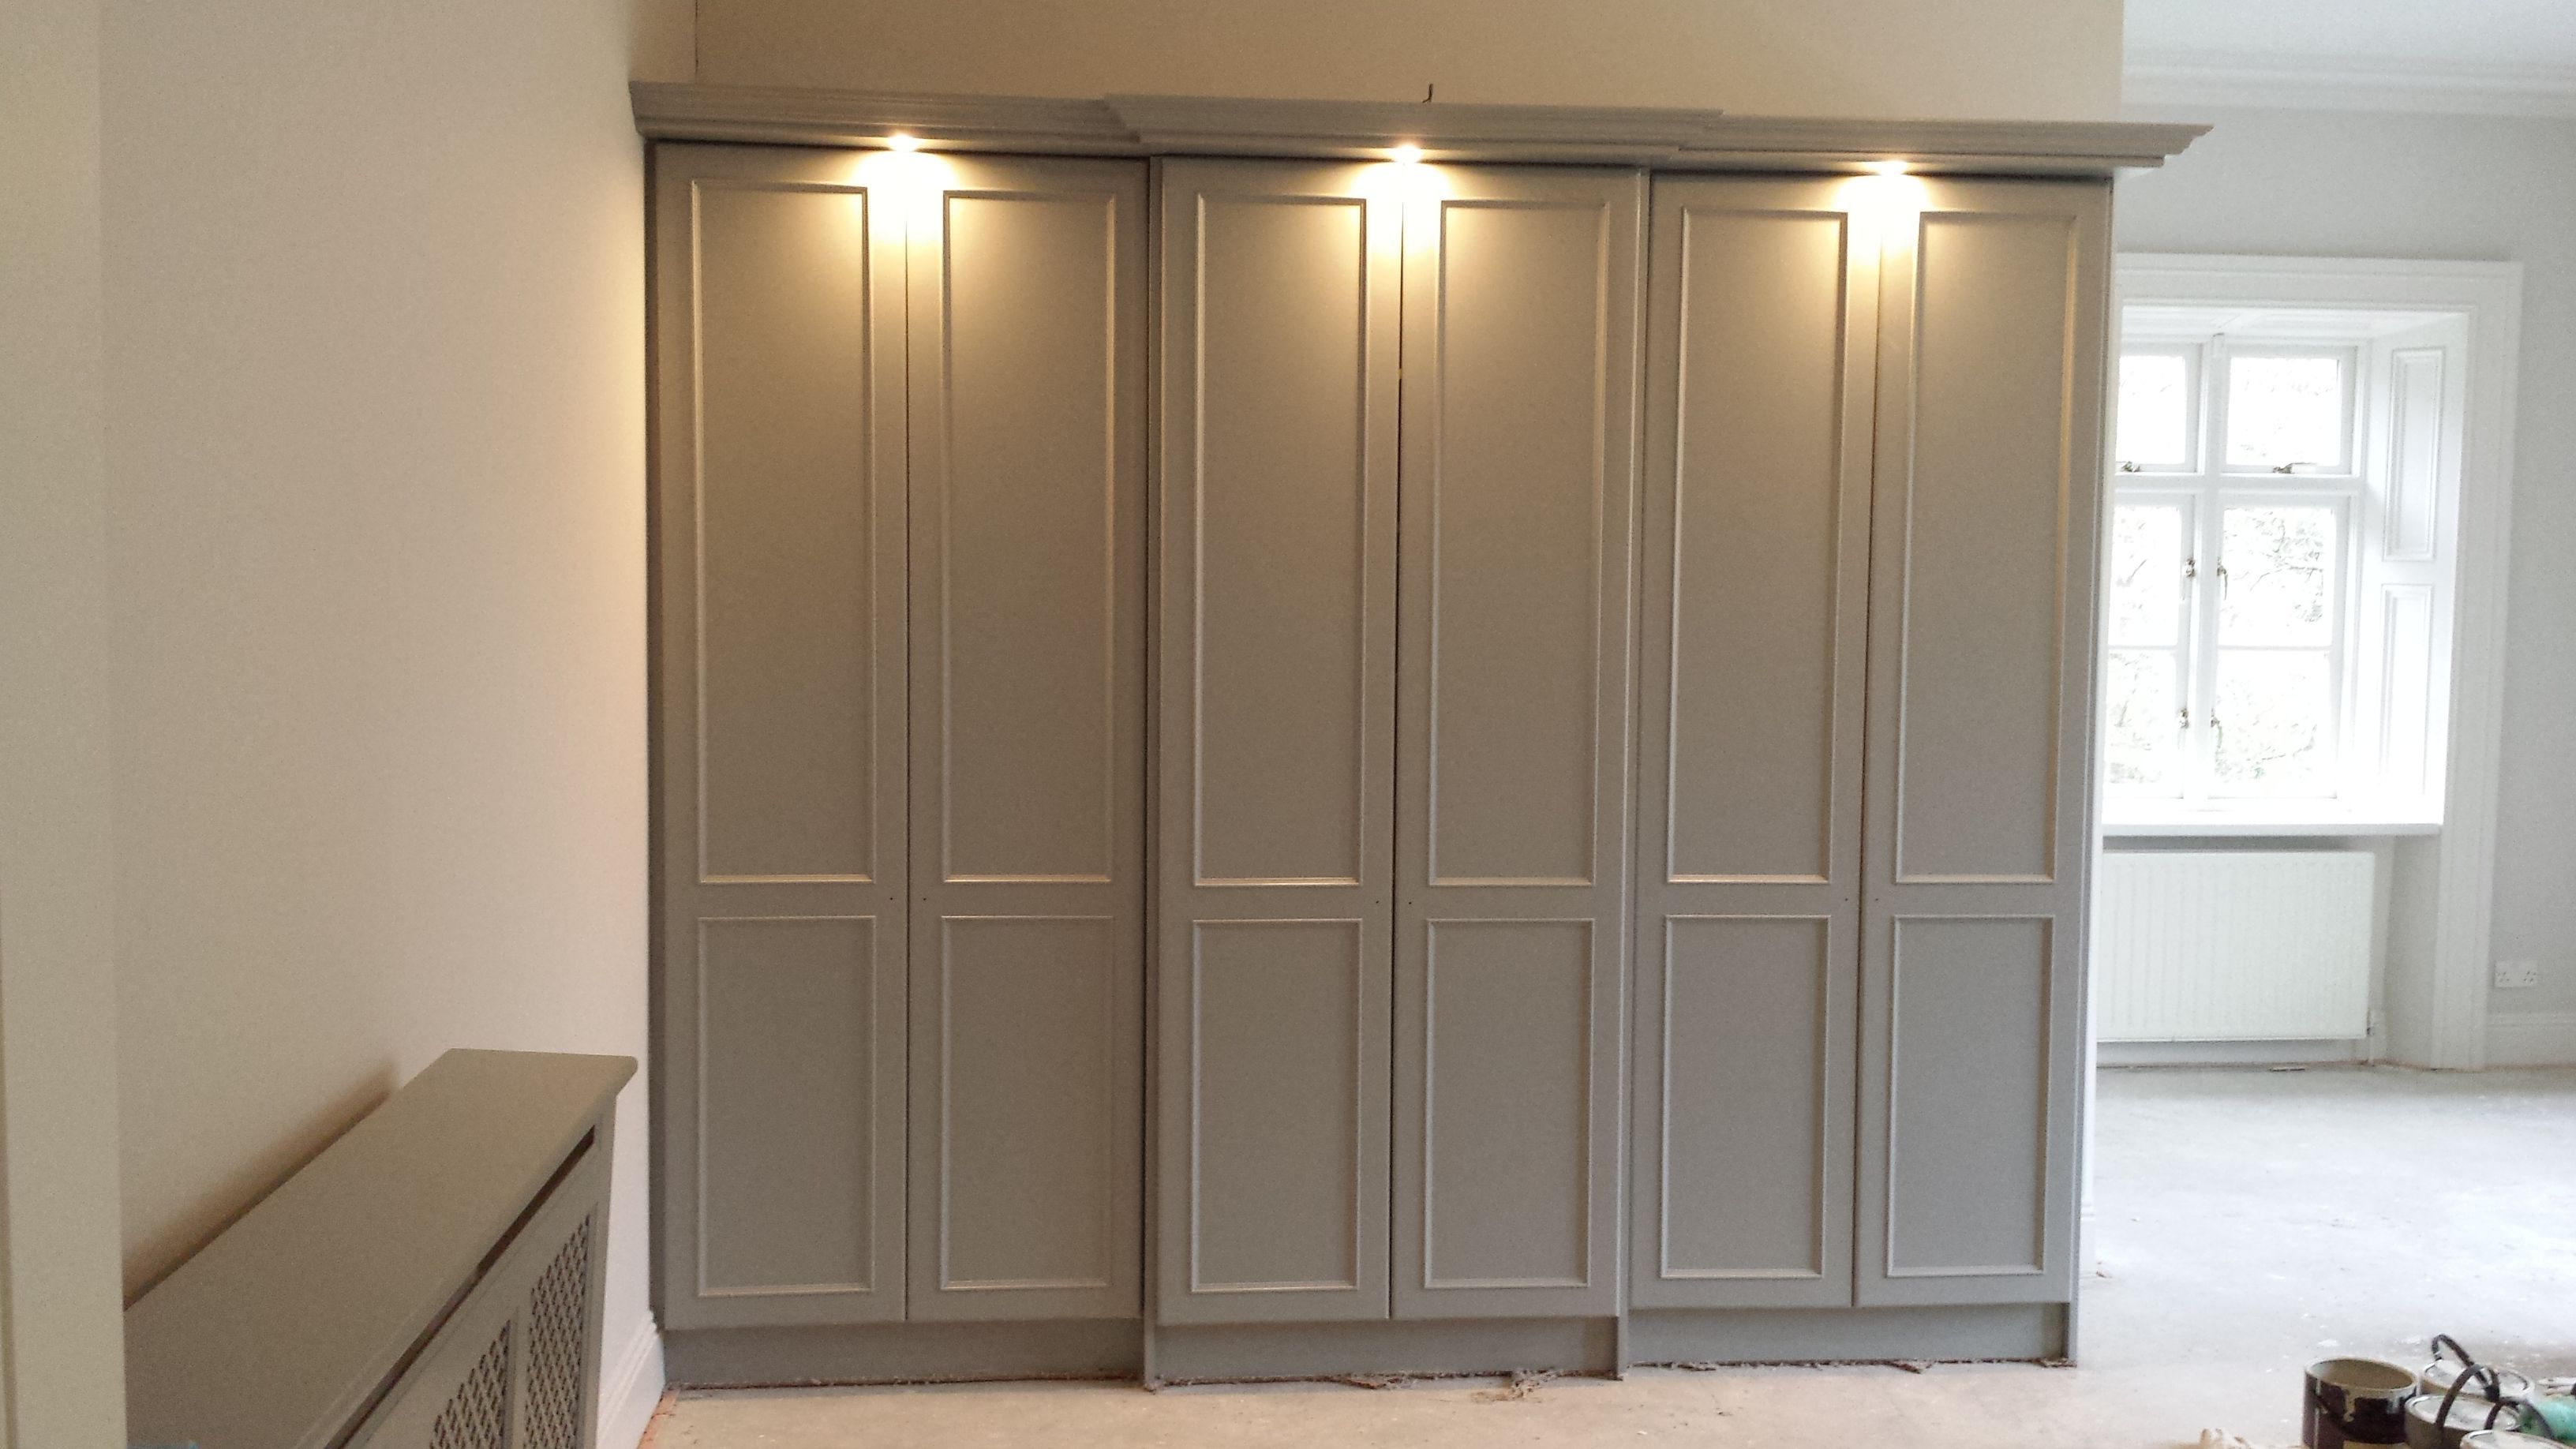 Wardrobe After, Painted With Farrow & Ball Paint | Built In Cupboards  Bedroom, Fitted Bedroom Furniture, Small House Bedroom Regarding Farrow And Ball Painted Wardrobes (Gallery 1 of 20)